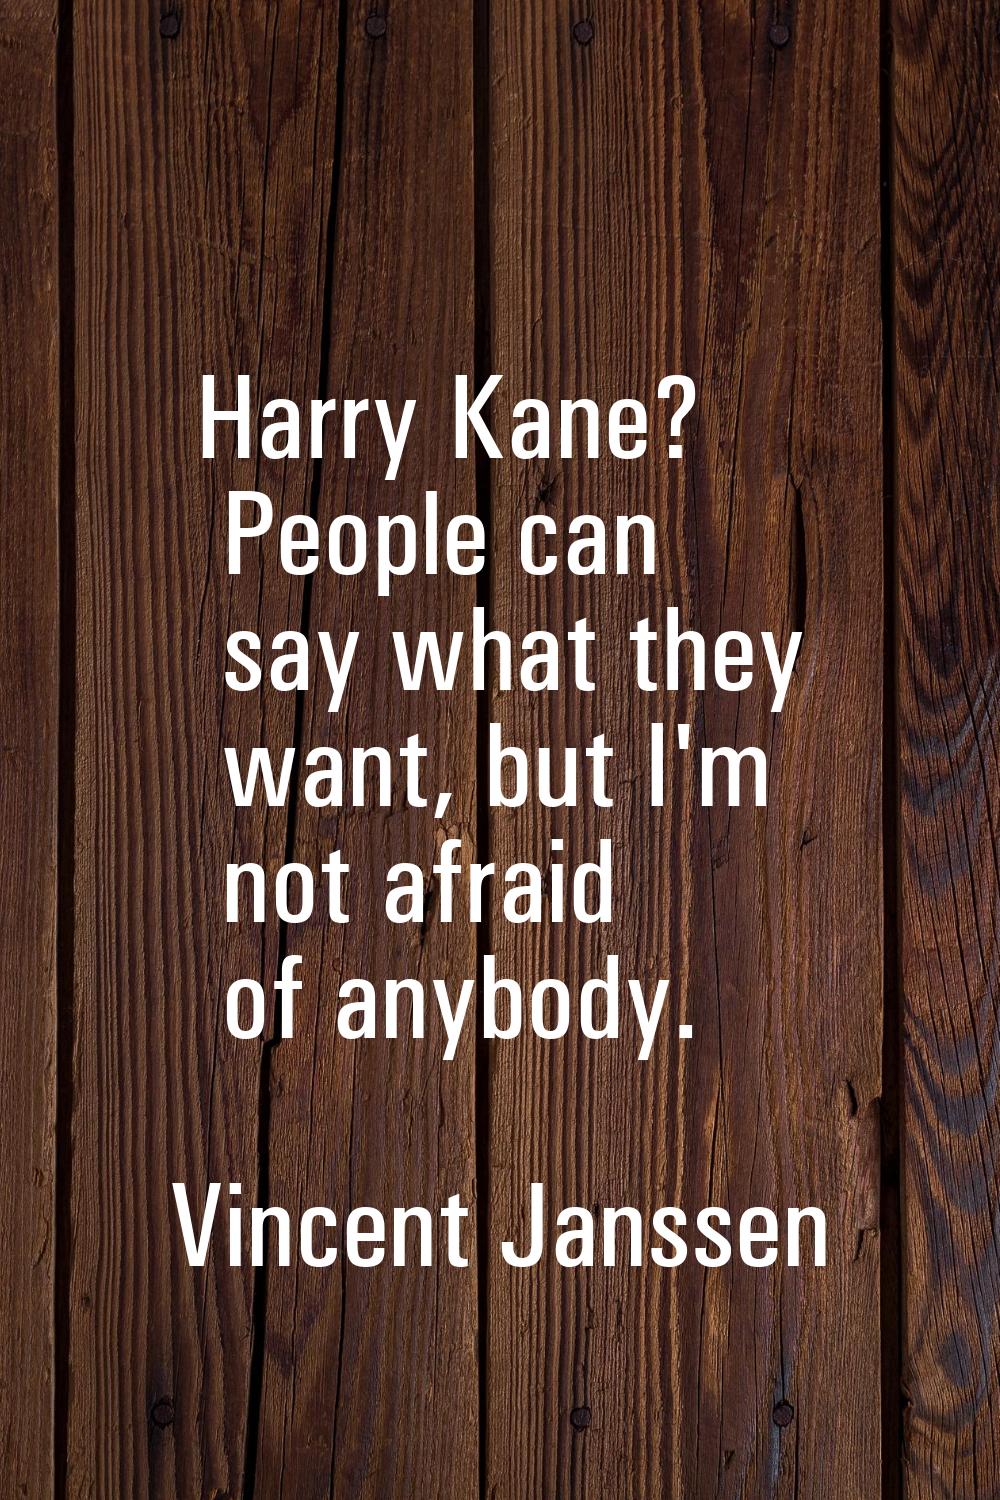 Harry Kane? People can say what they want, but I'm not afraid of anybody.